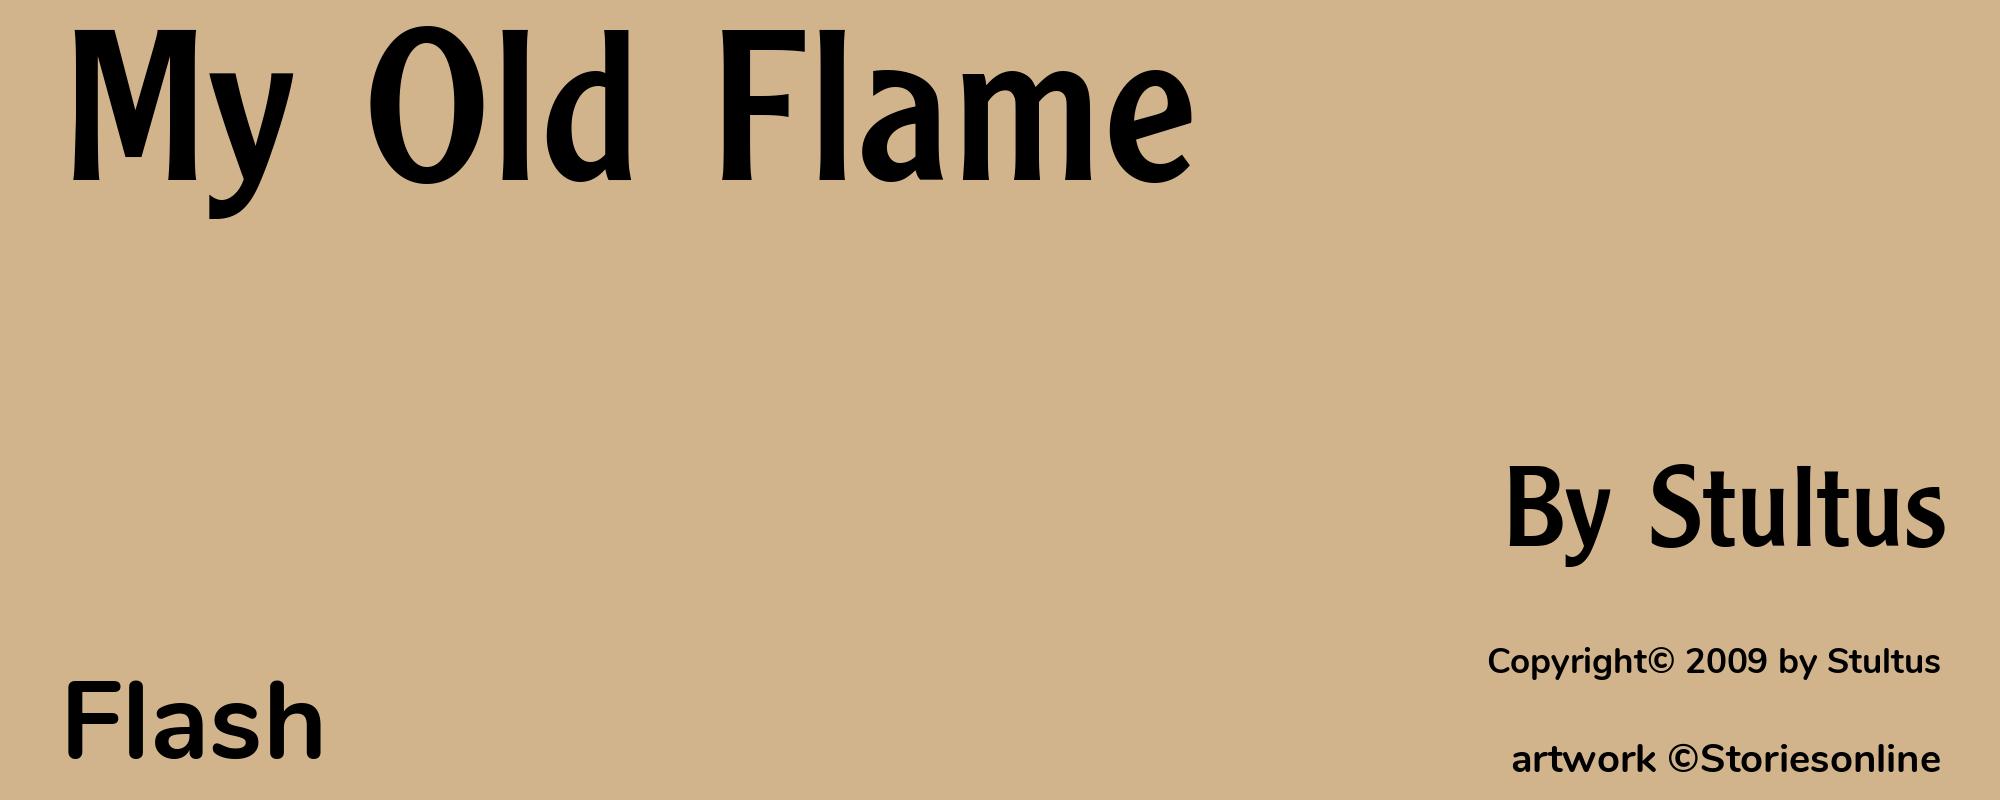 My Old Flame - Cover